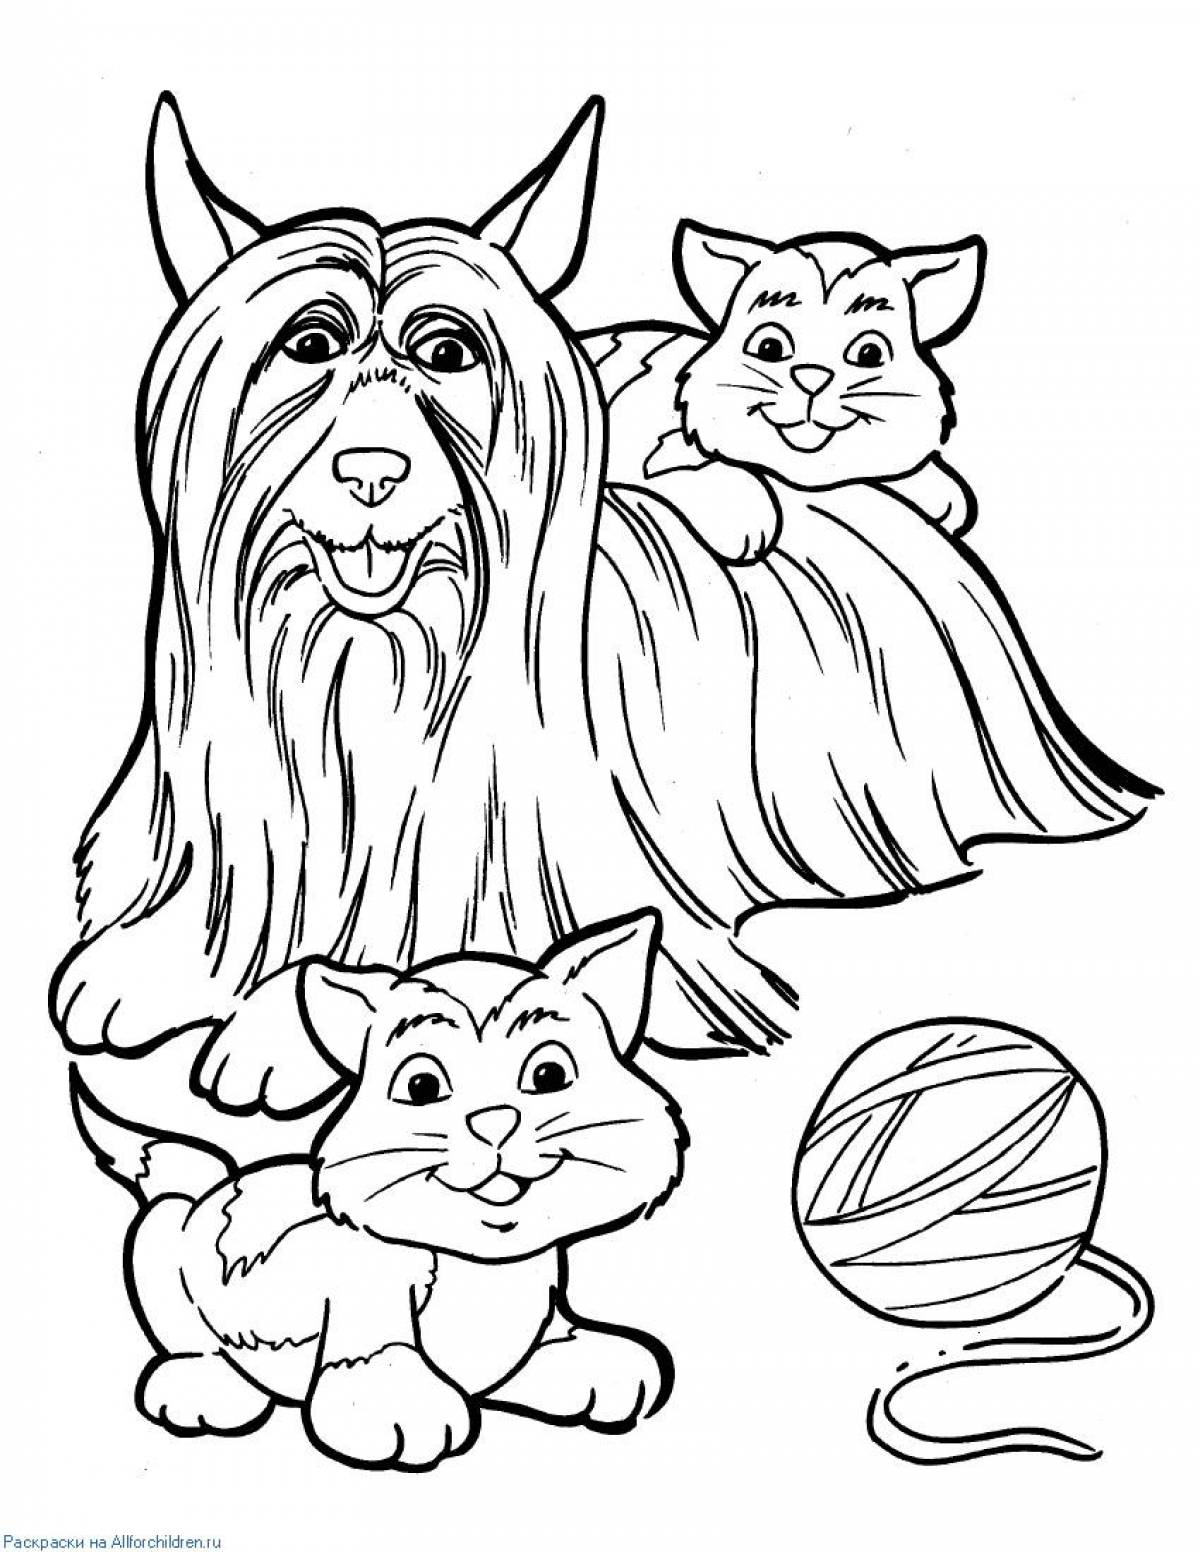 Cute dog and cat coloring page